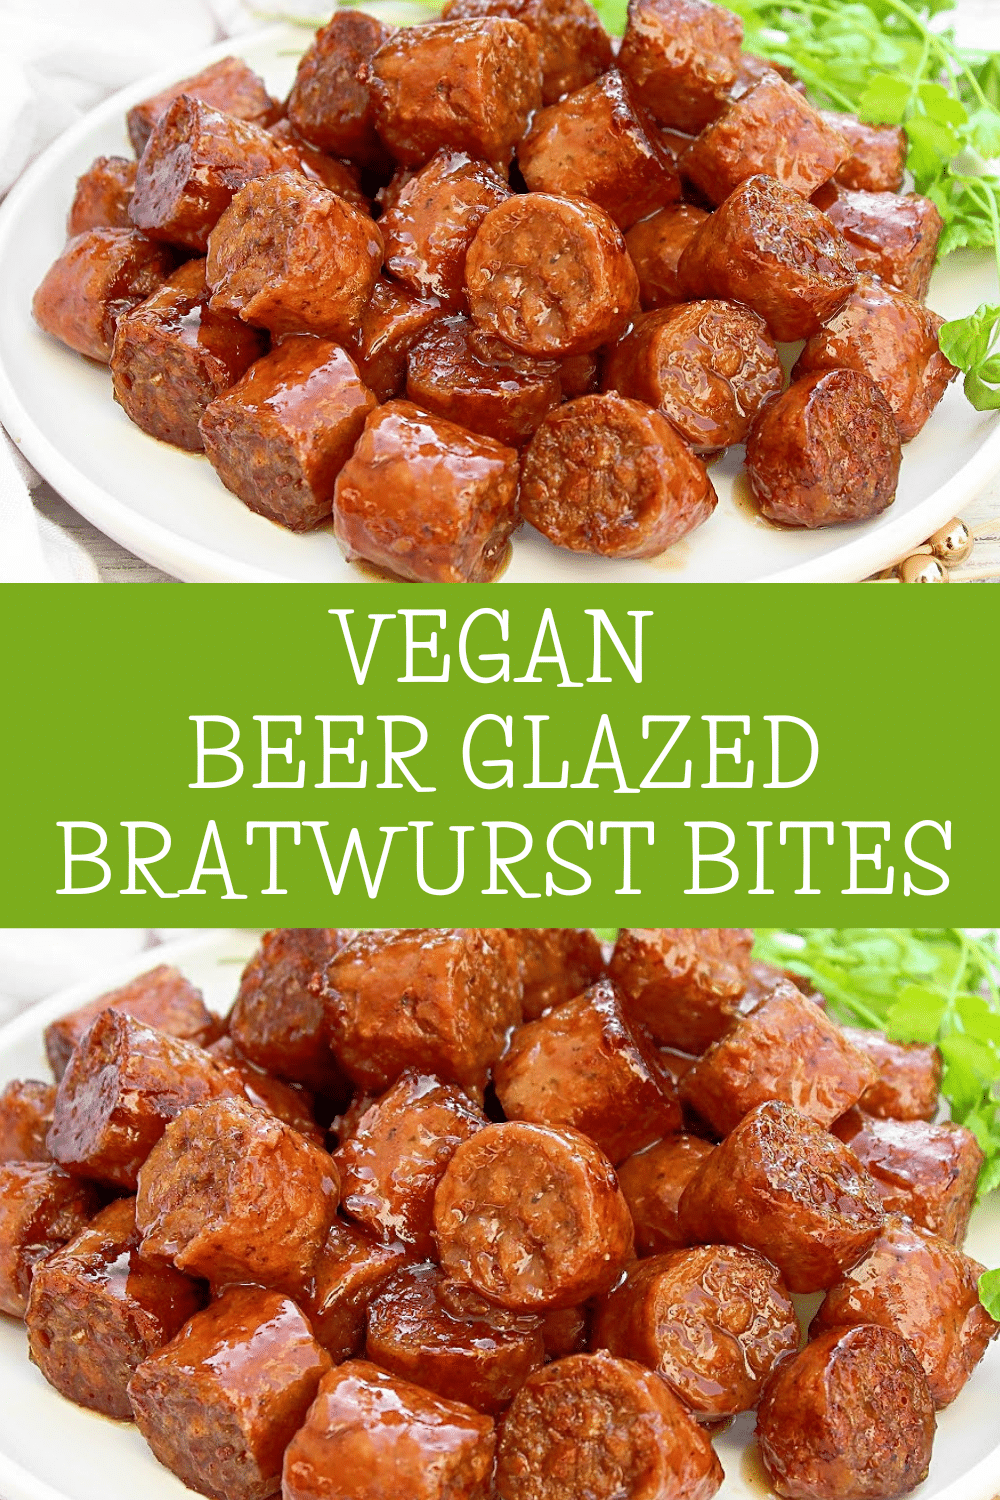 Beer Glazed Bratwurst Bites ~ Plant-based bratwurst combined with a lager beer glaze for the perfect balance of sweet and tangy.  via @thiswifecooks